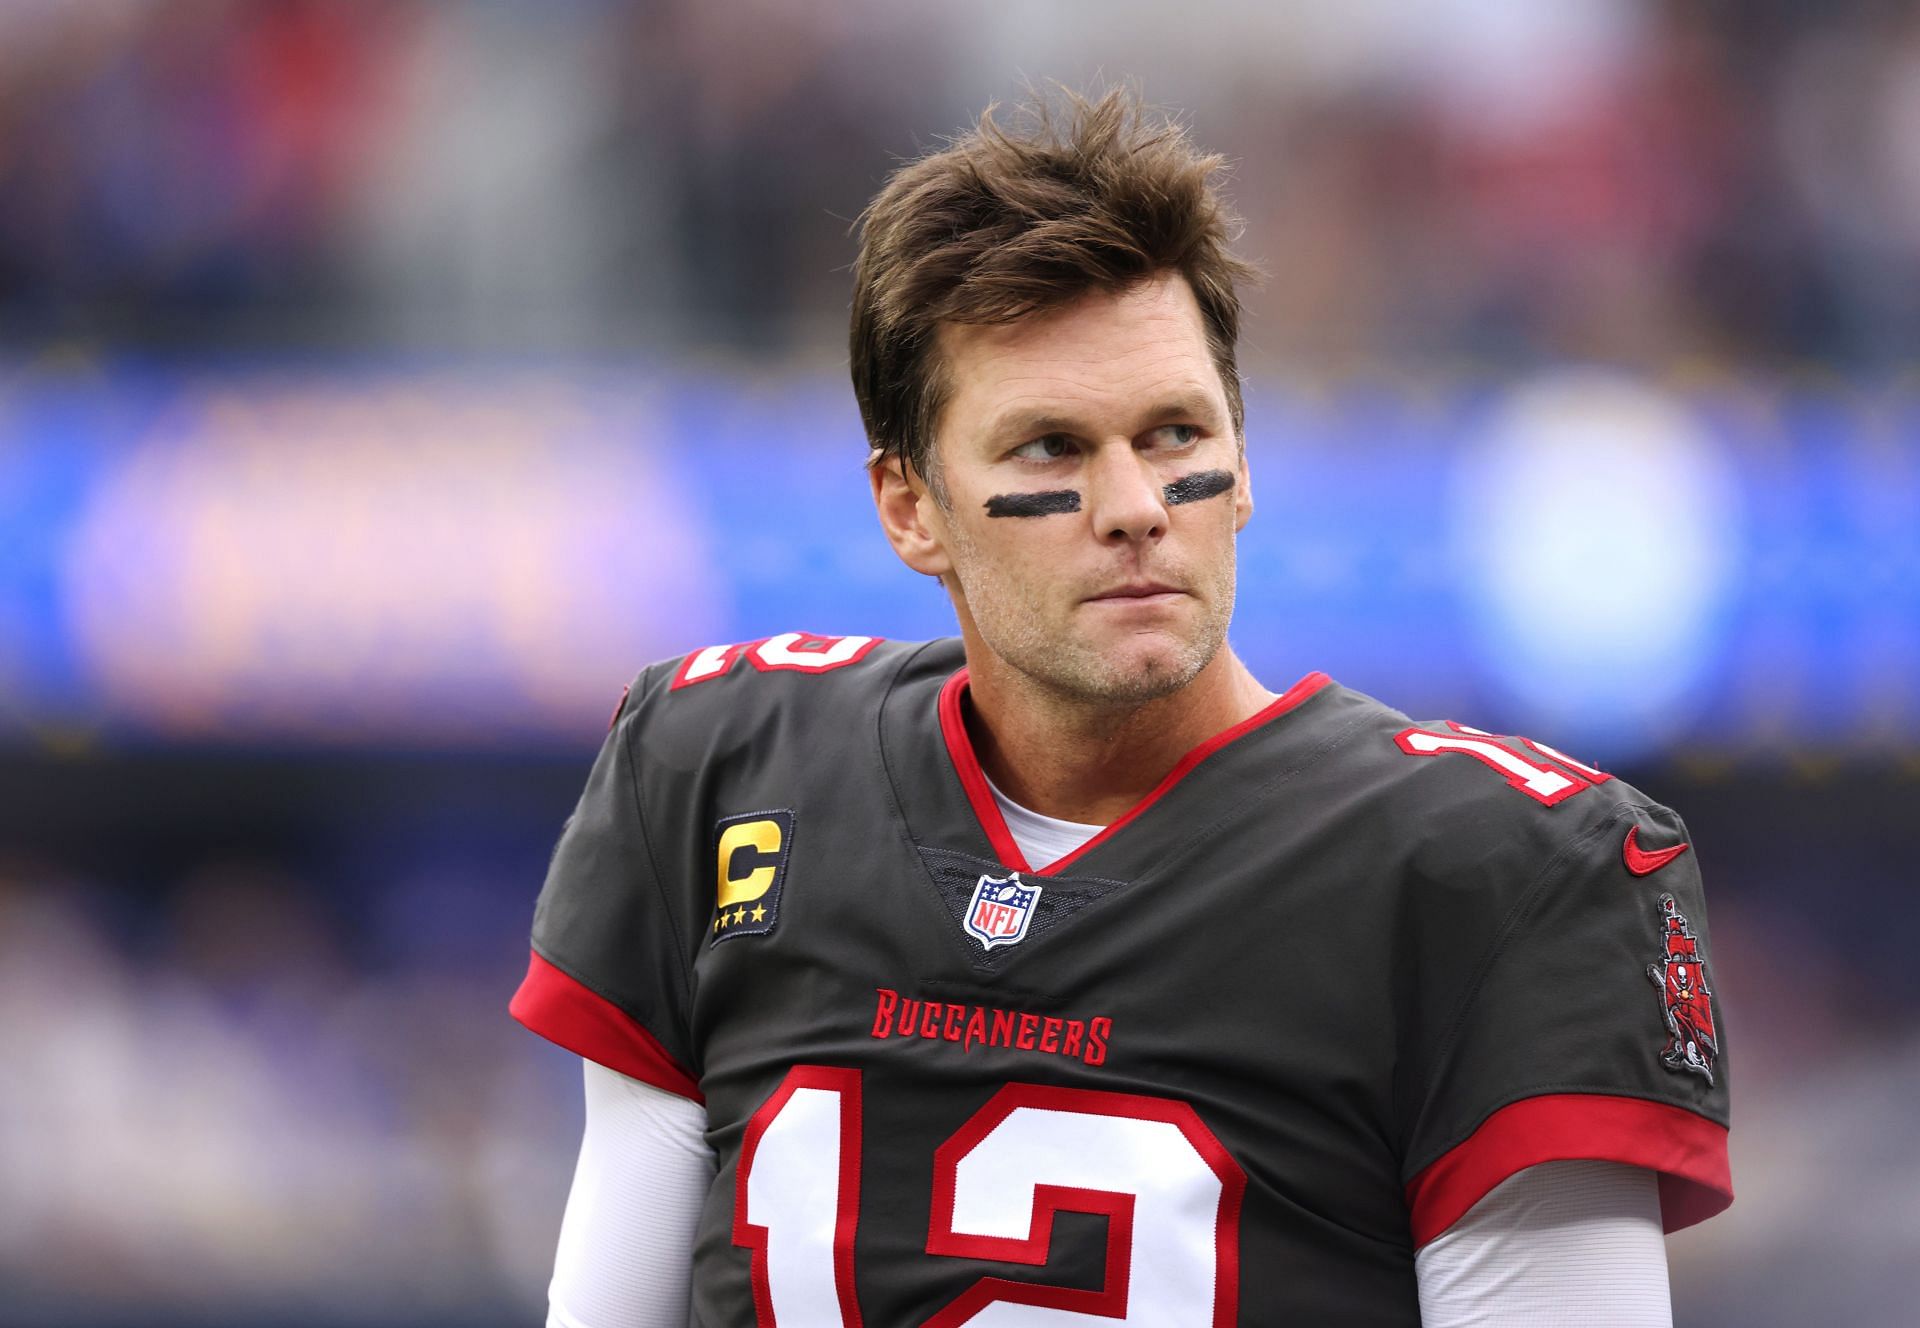 Why Bucs expect Tom Brady to play in Tampa Bay if he unretires